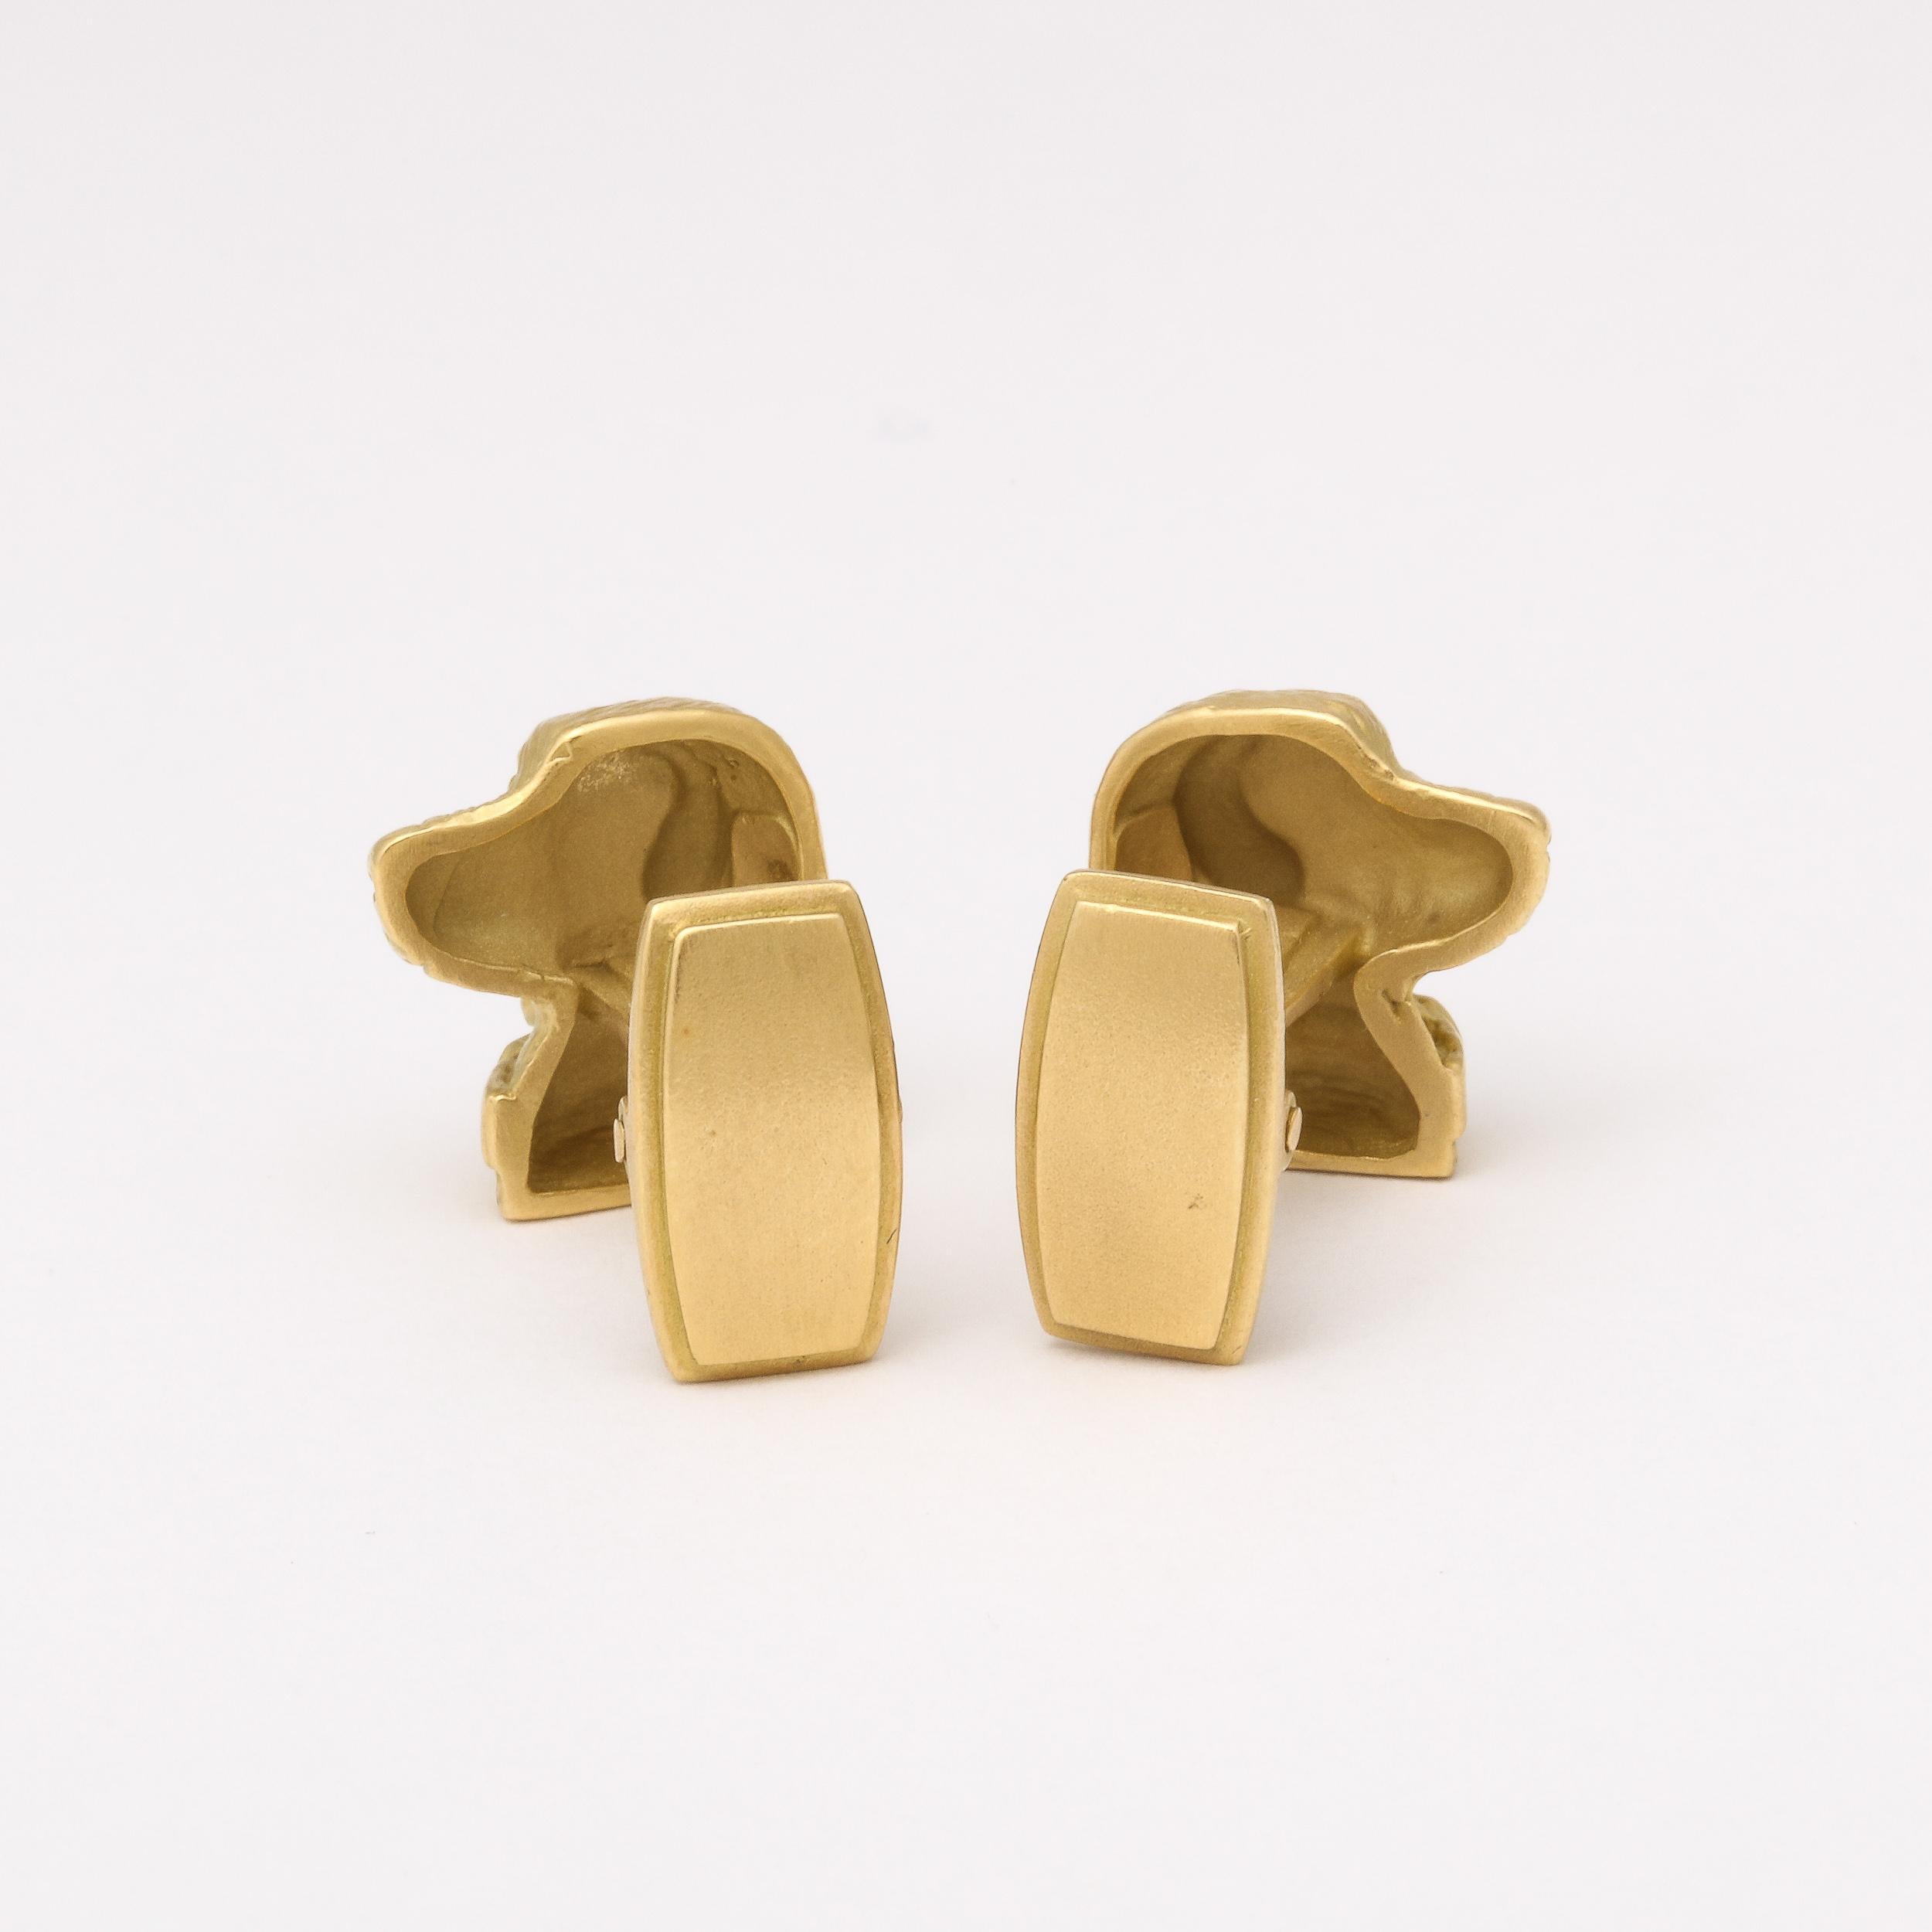 Modernist Cufflinks with Golden Retriever Canine Motif in 14 Carat Yellow Gold In Excellent Condition For Sale In New York, NY